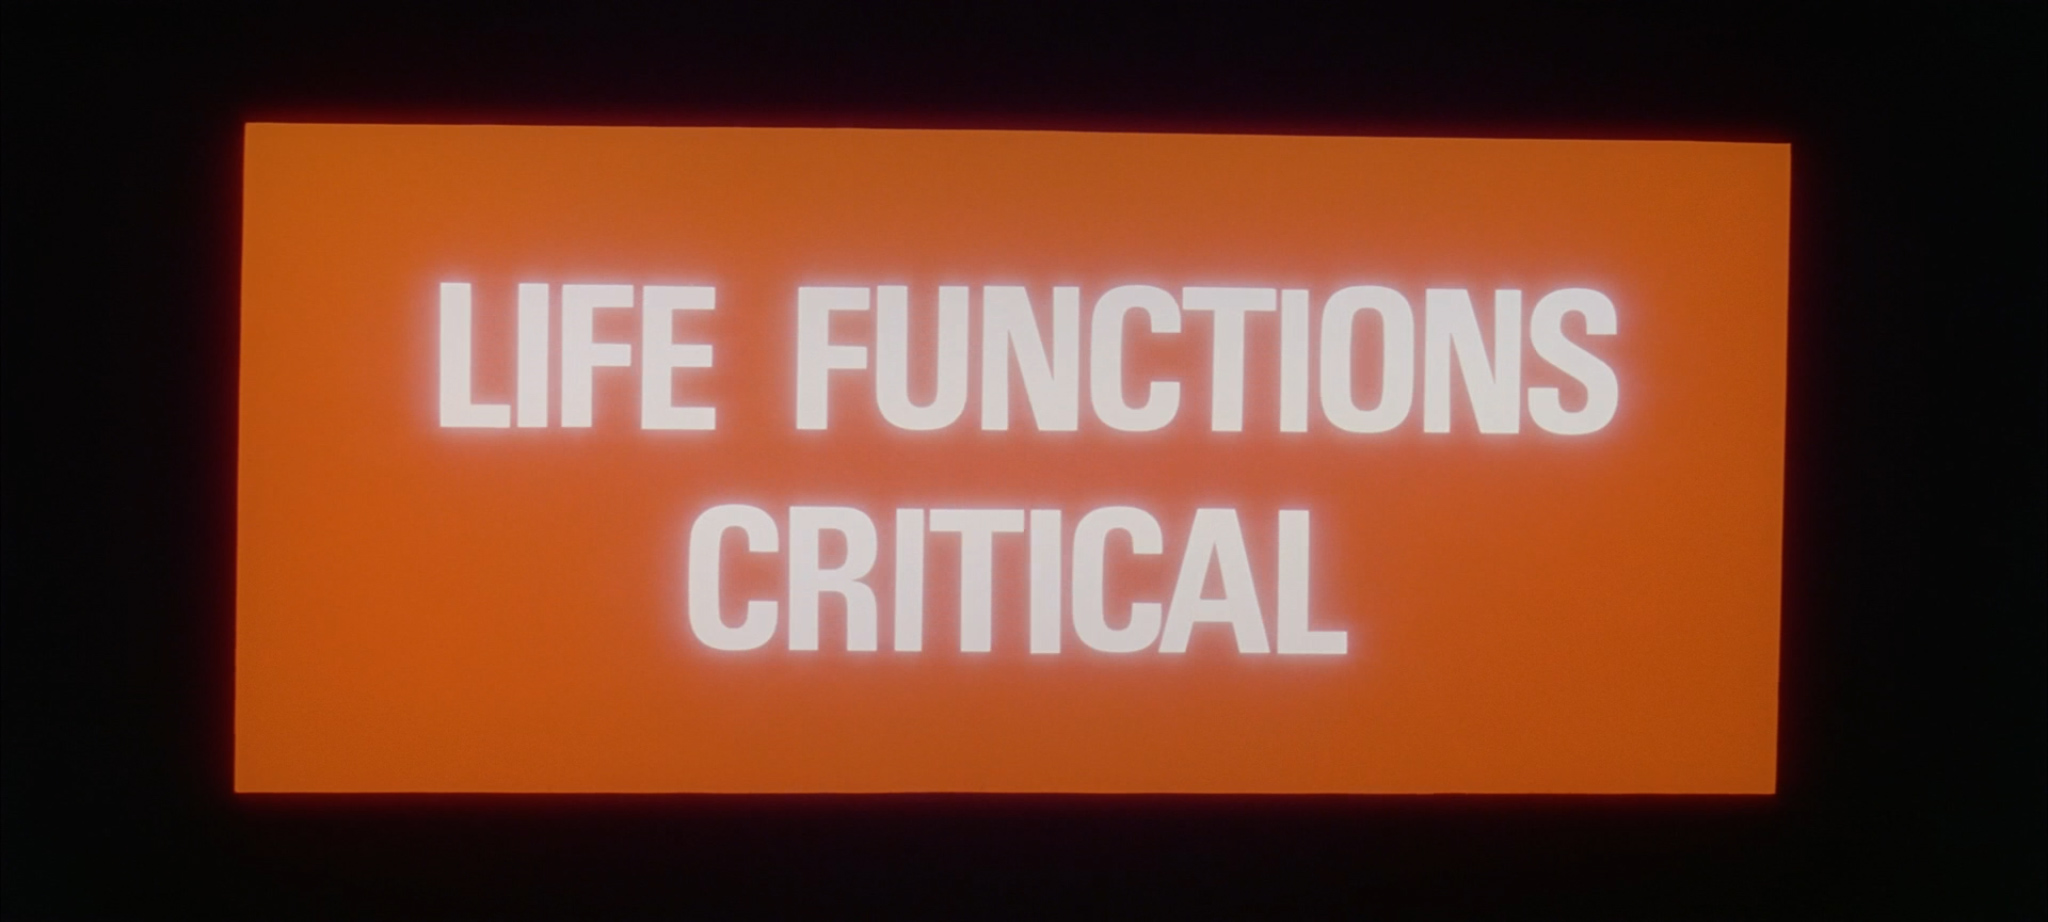 Function life